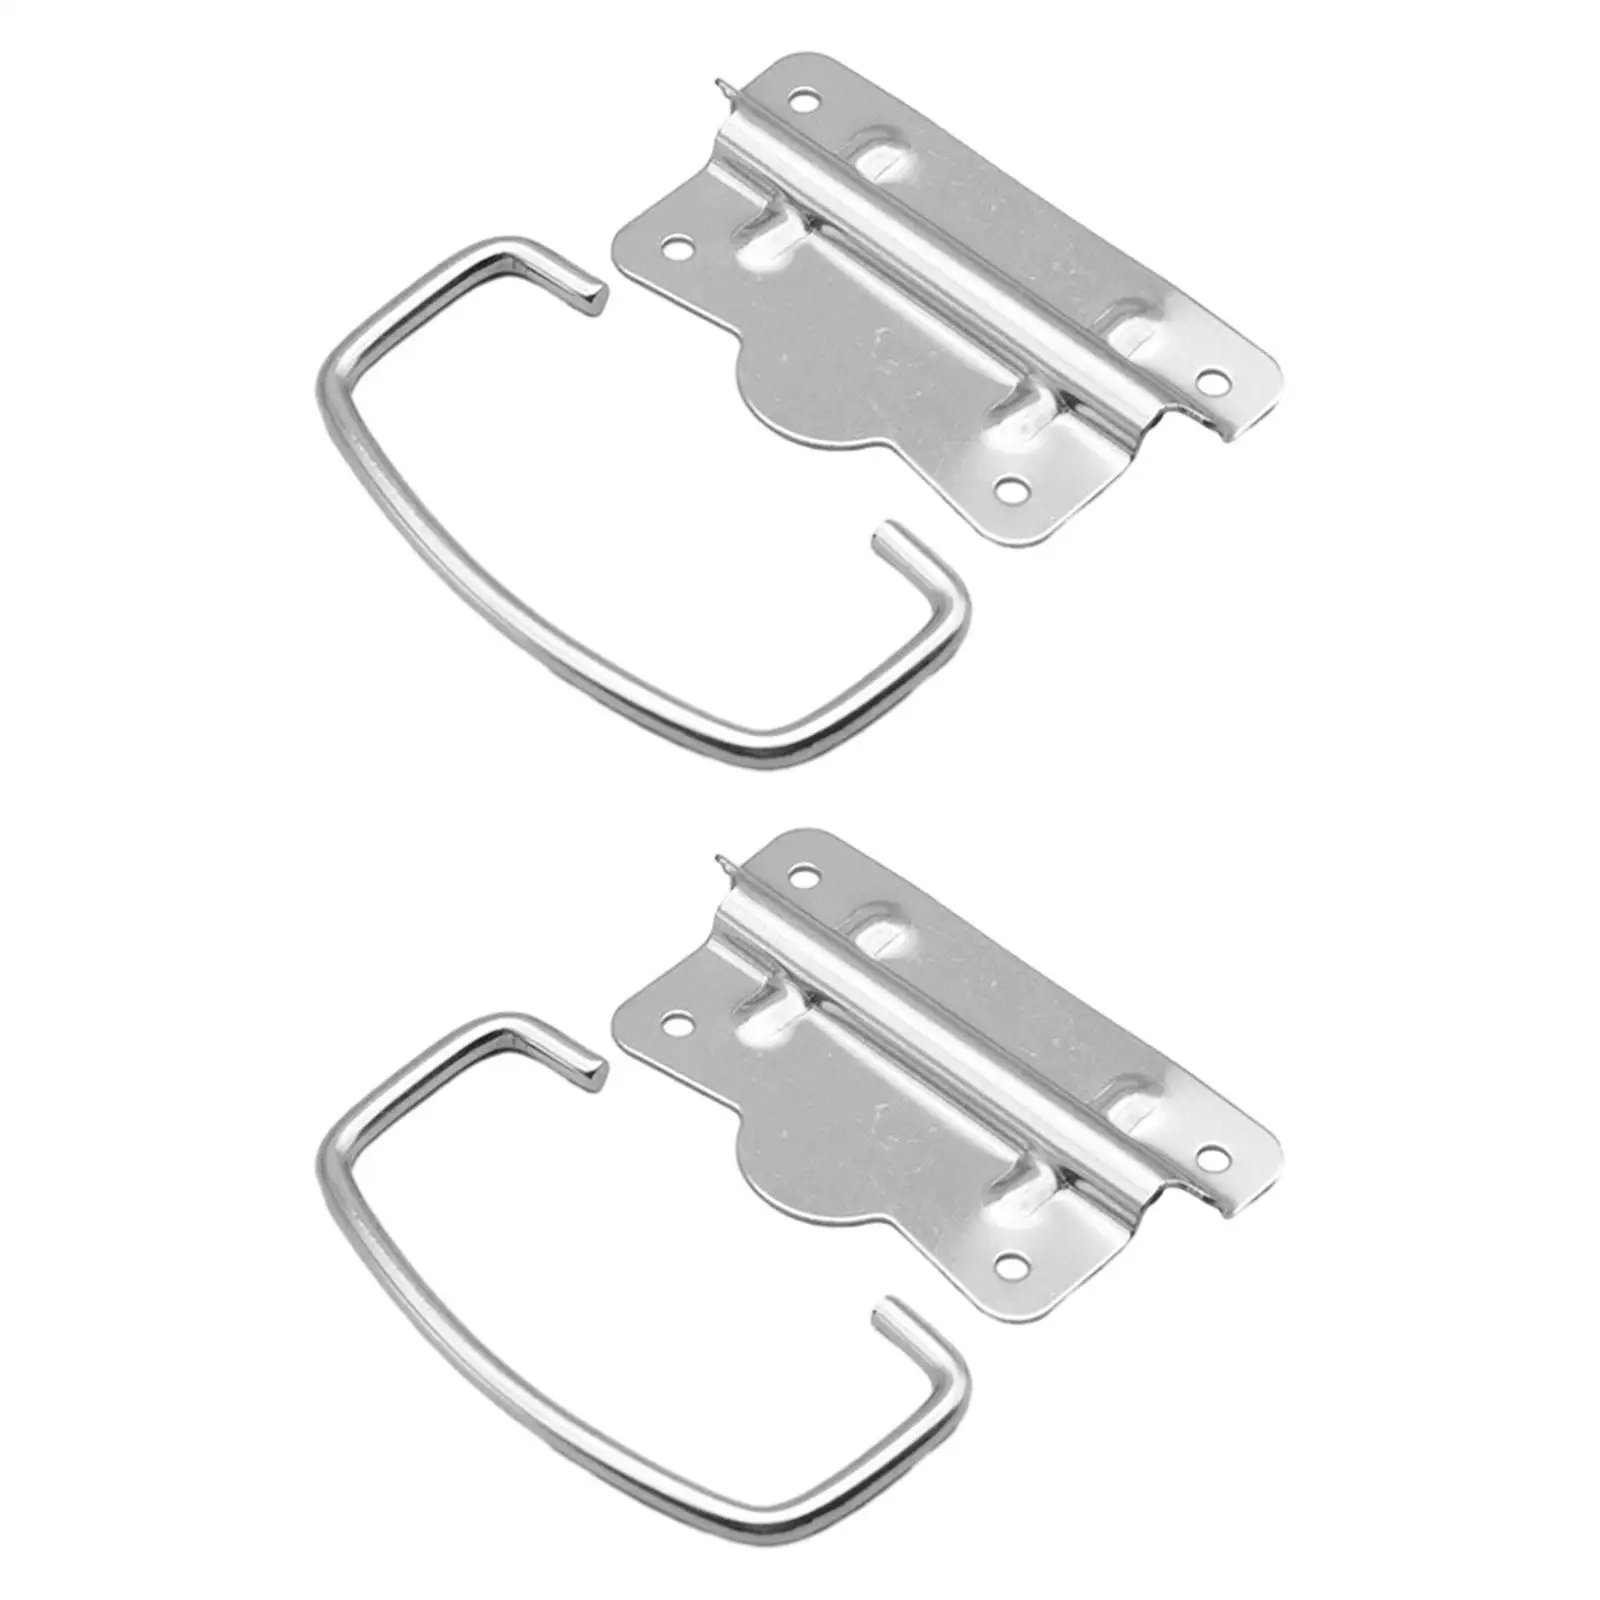 2x Stainless Steel Folding Pull Handles Heavy Duty Pull Rings Handle for Drawers Furniture Dresser Wooden Box Lifting Door Chest